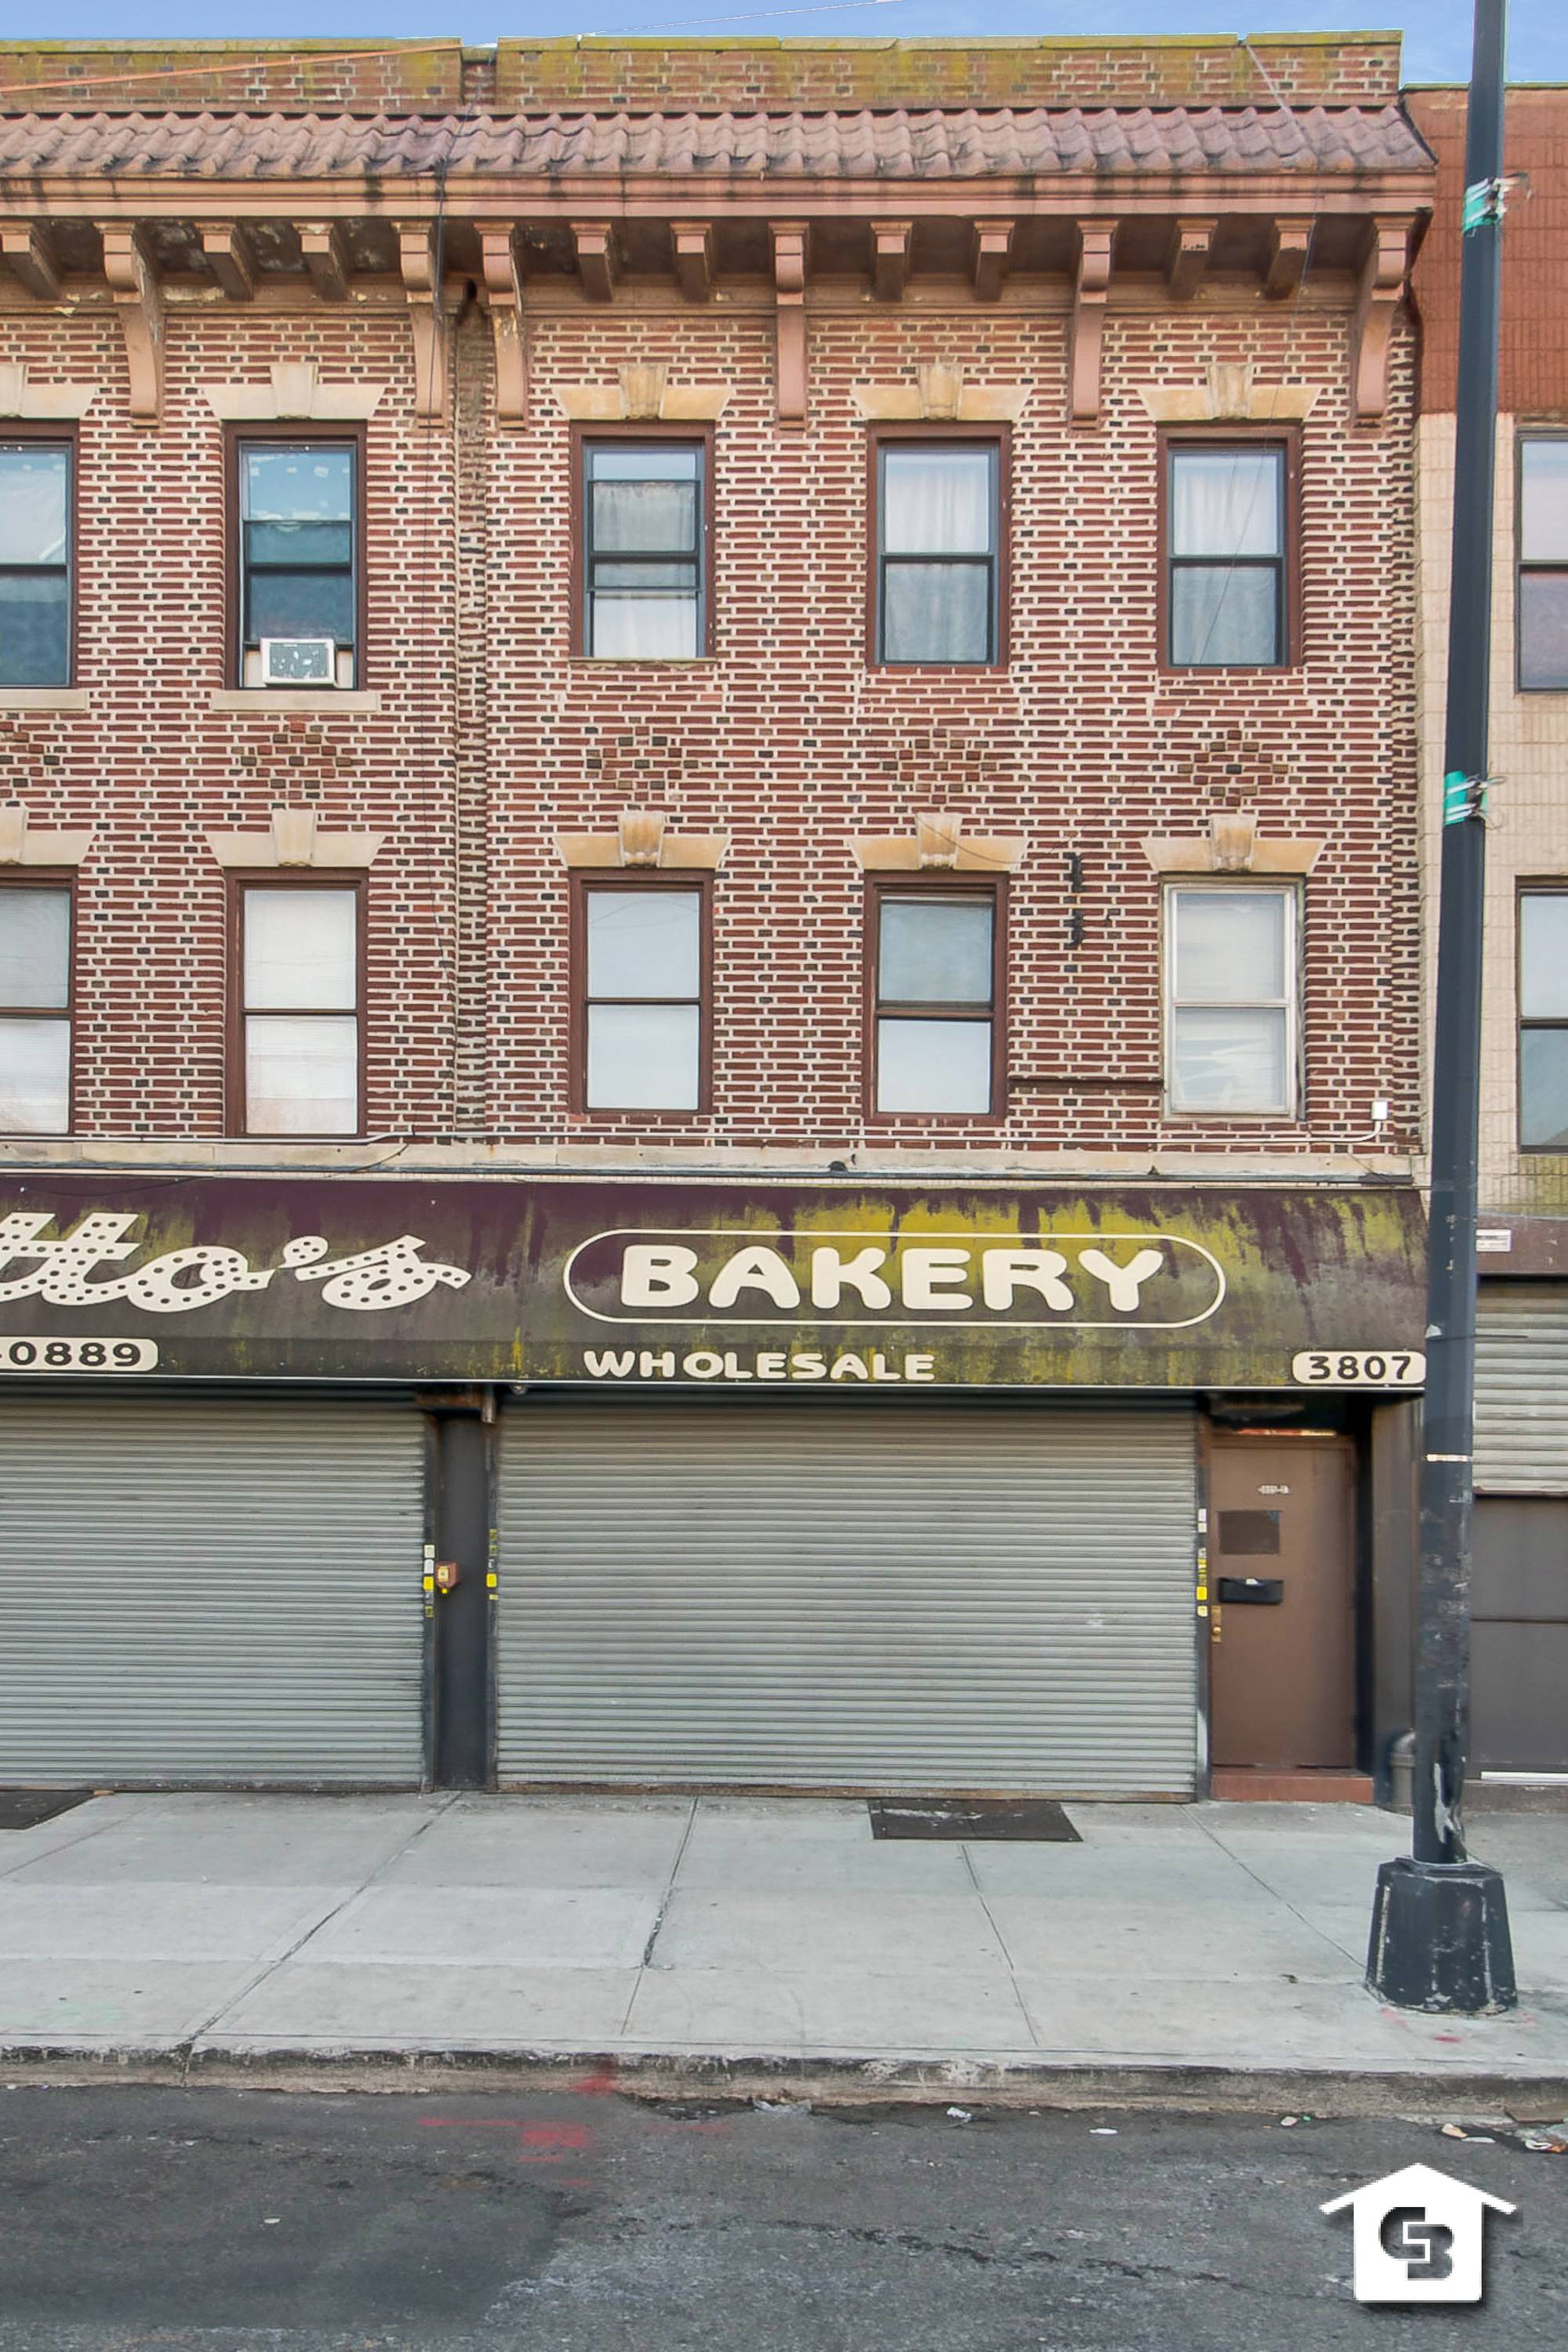 We are pleased to offer for sale a mixed use building in the Borough Park section of Brooklyn.